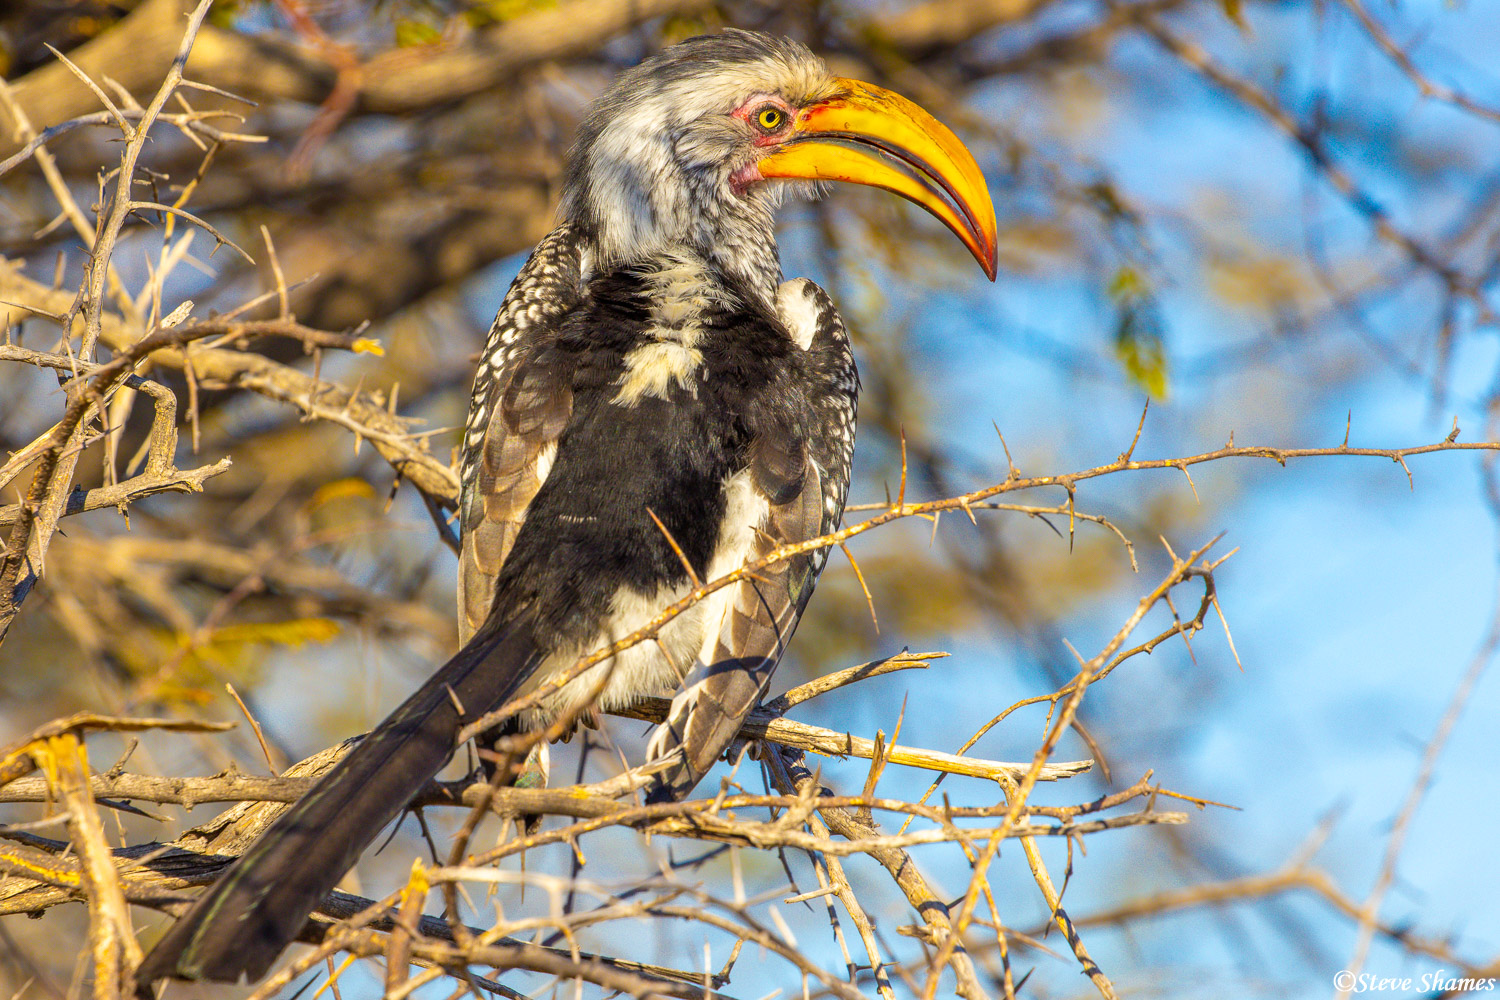 There are lots of hornbills in this part of Botswana. This one is a yellow billed hornbill.